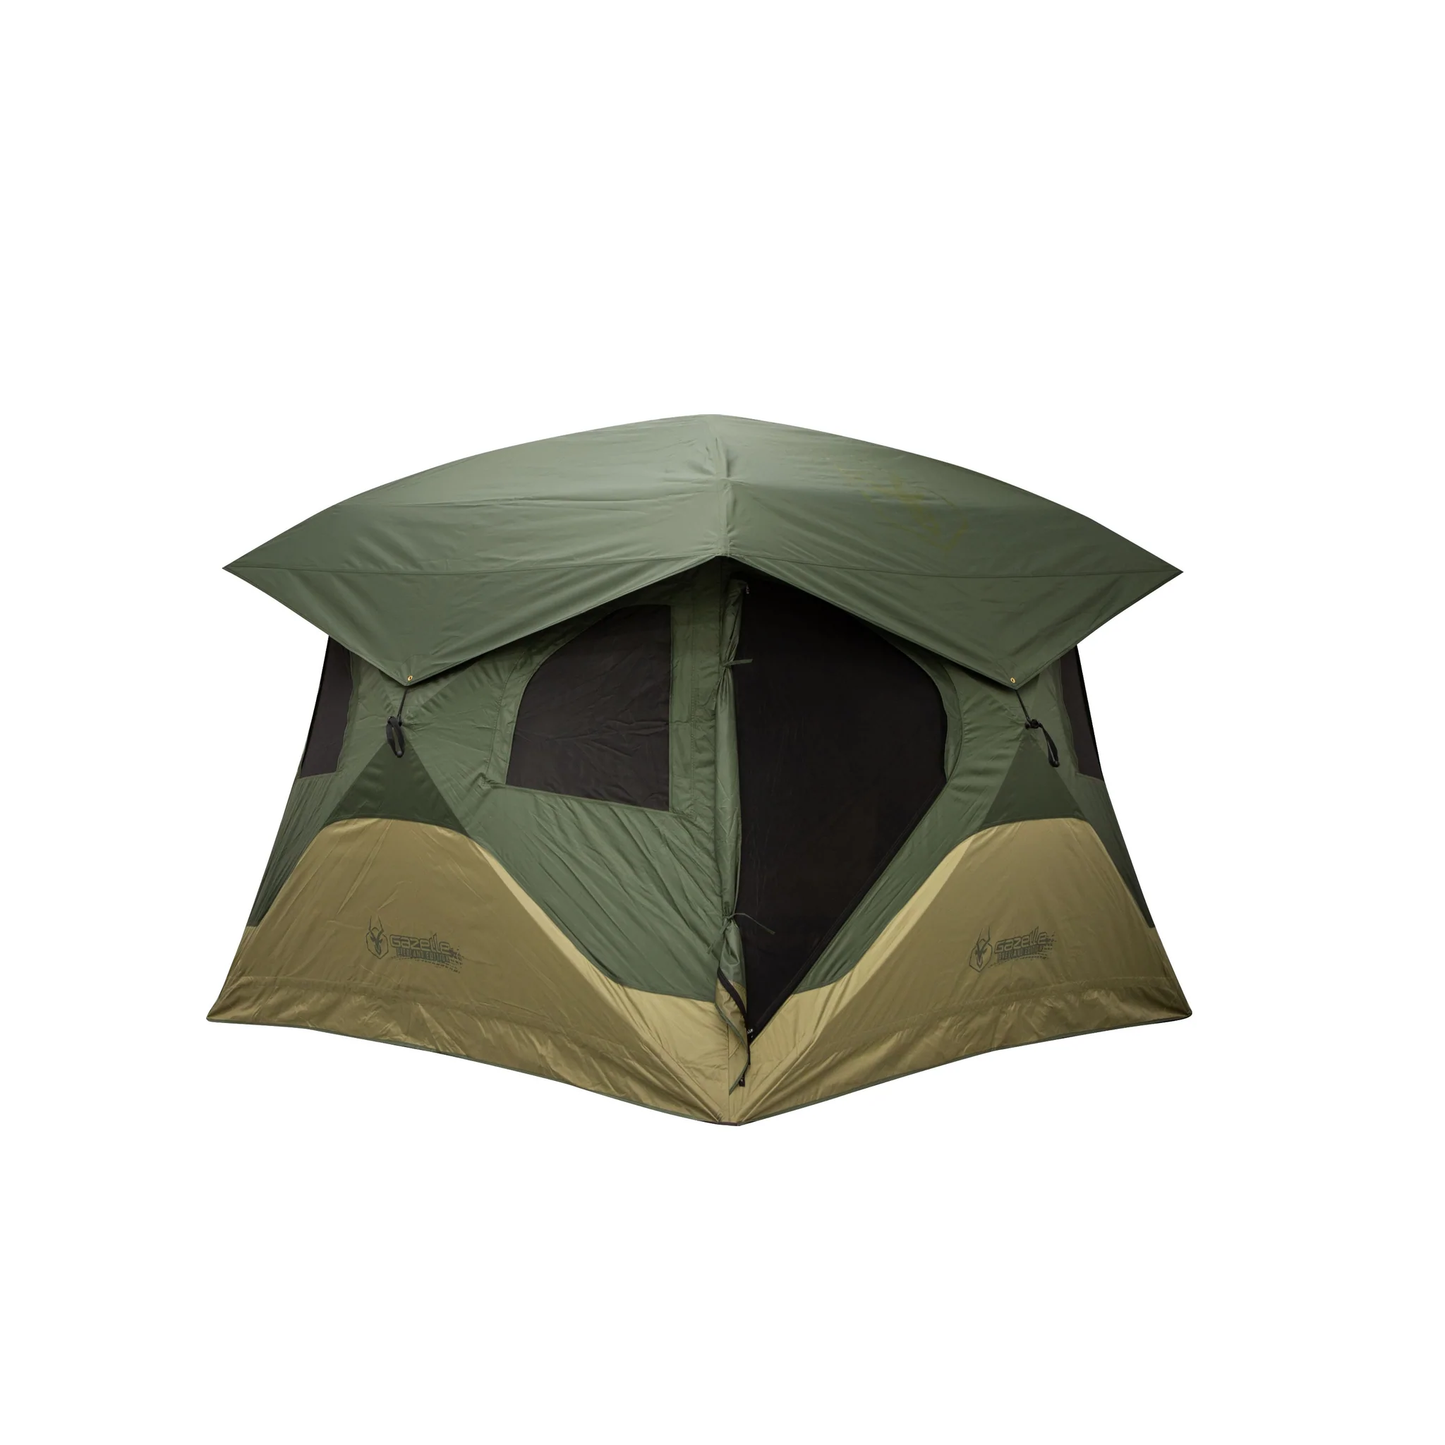 T4 OVERLAND Edition - Alpine Green - 4 Person Hub Tent - by Gazelle Tents